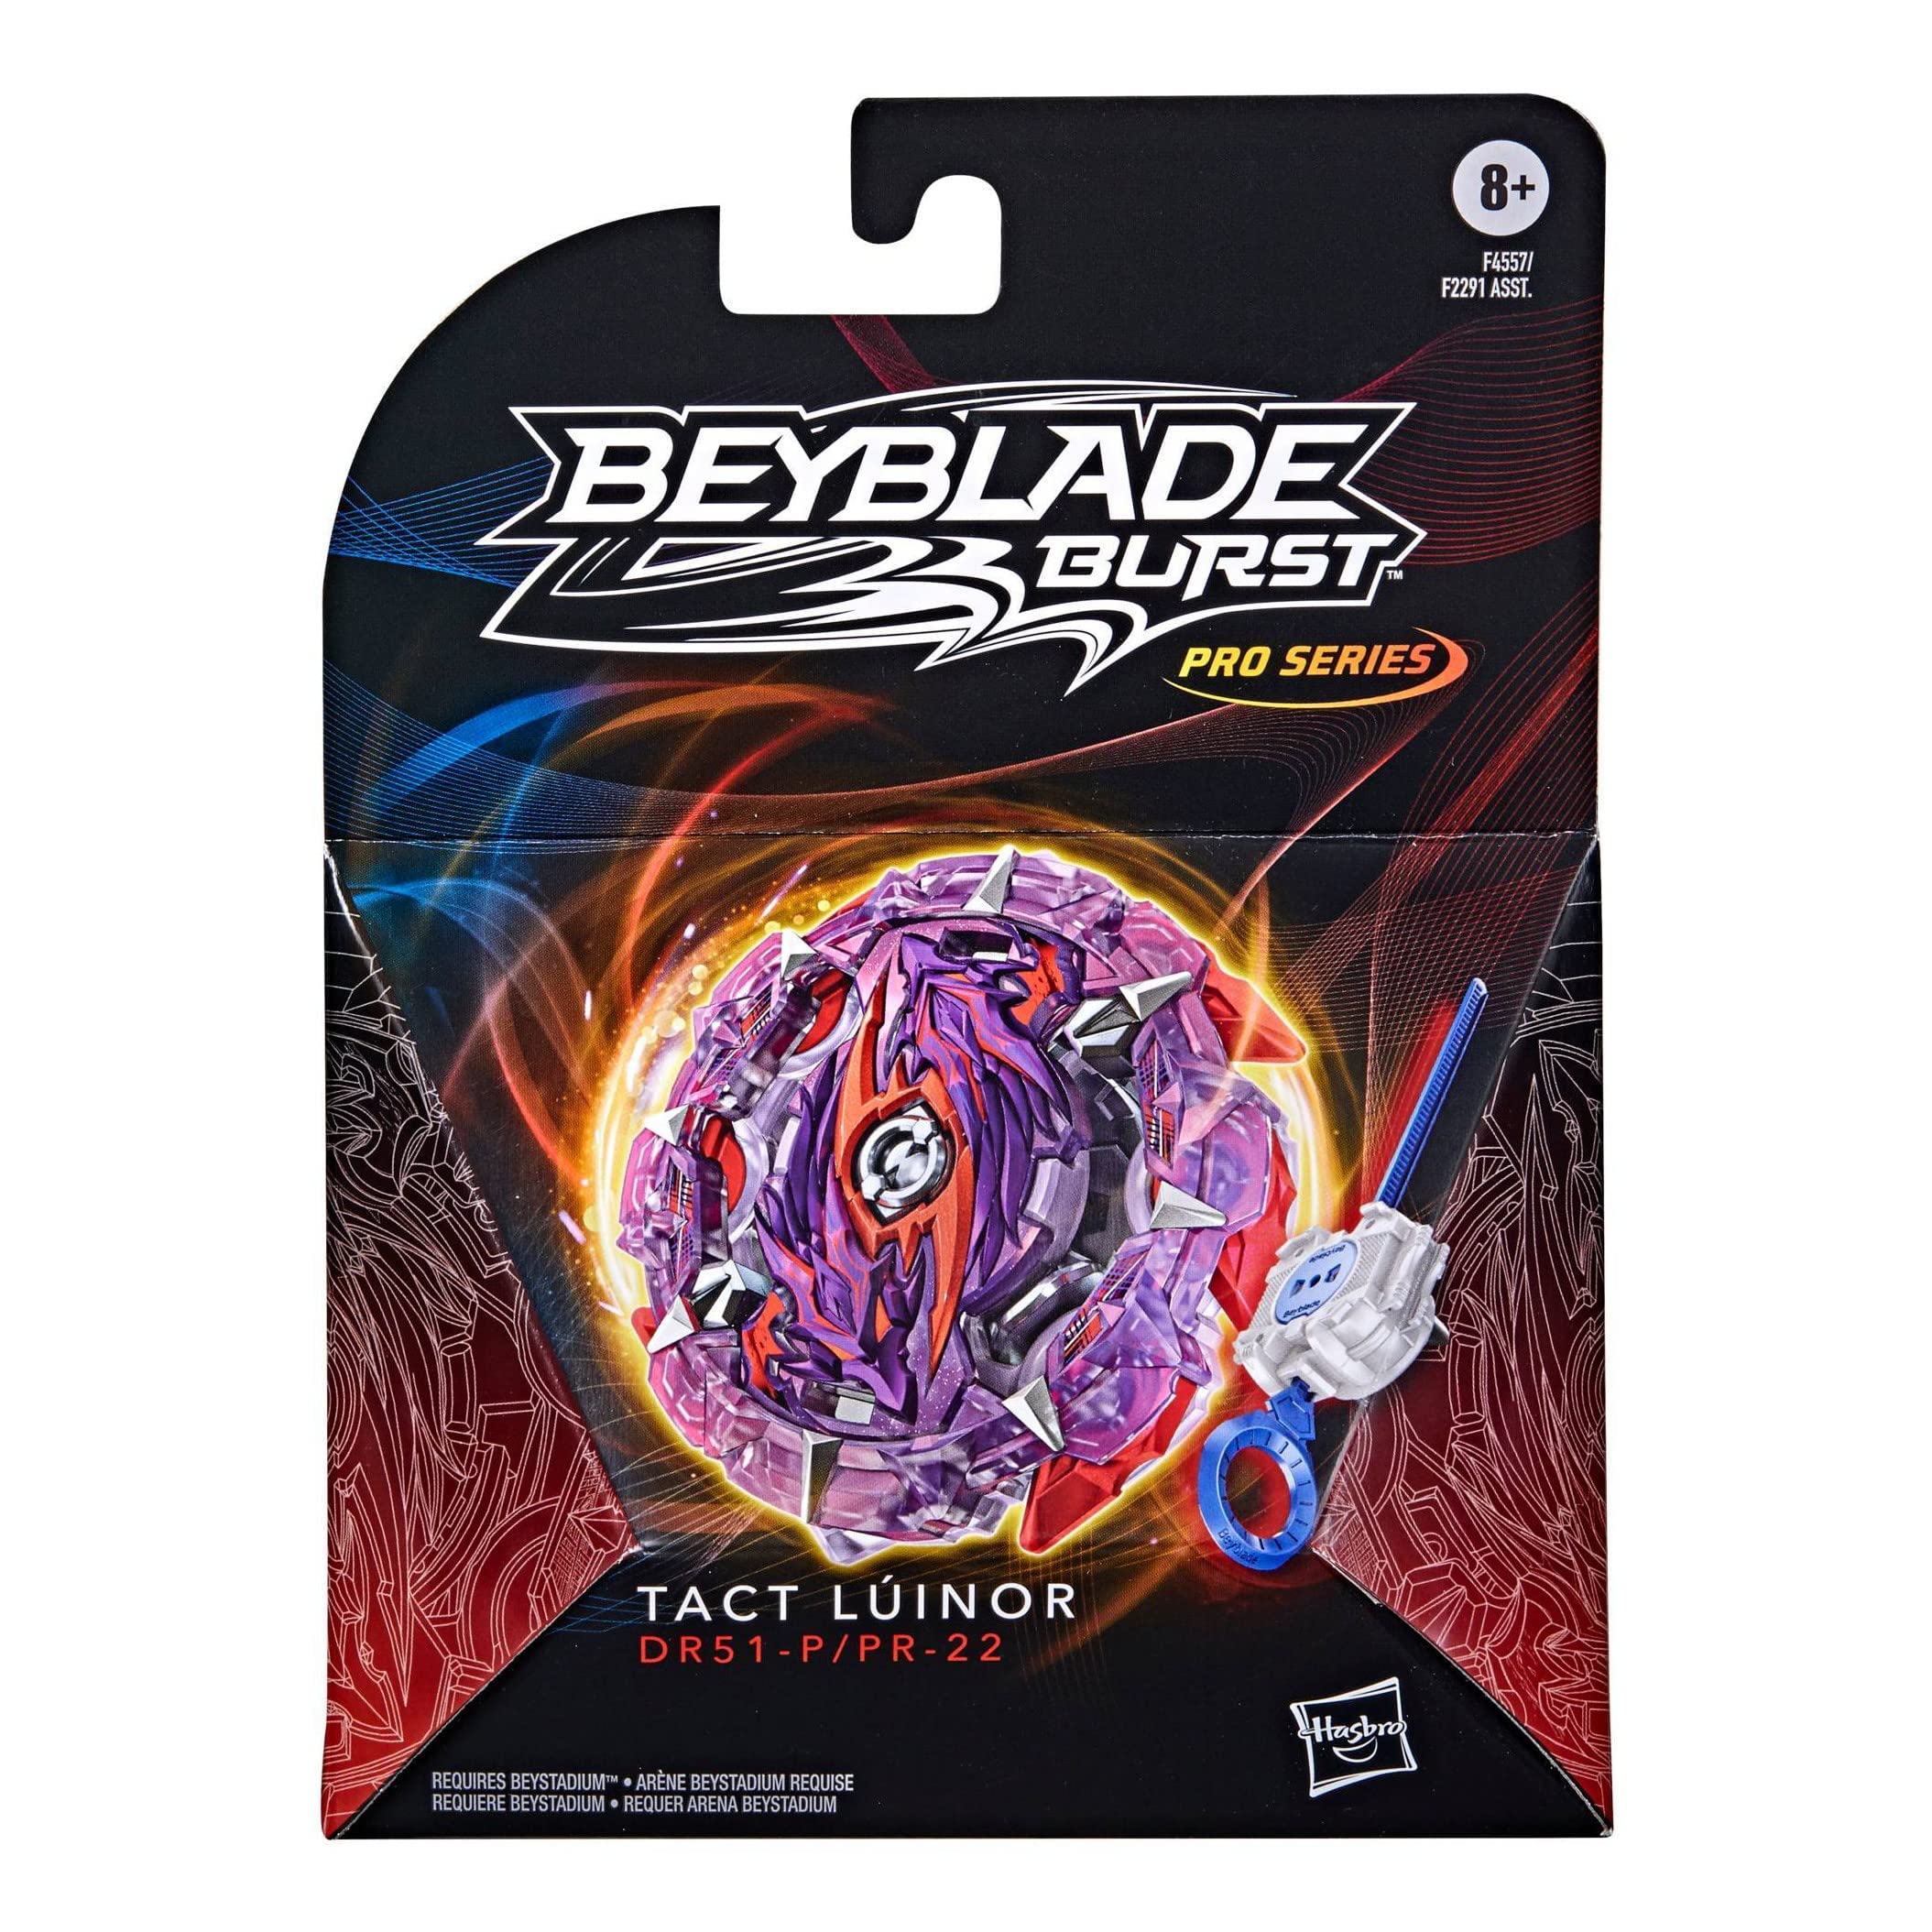 BEYBLADE Burst Pro Series Tact Lúinor Spinning Top Starter Pack - Balance Type Battling Game Top with Launcher Toy